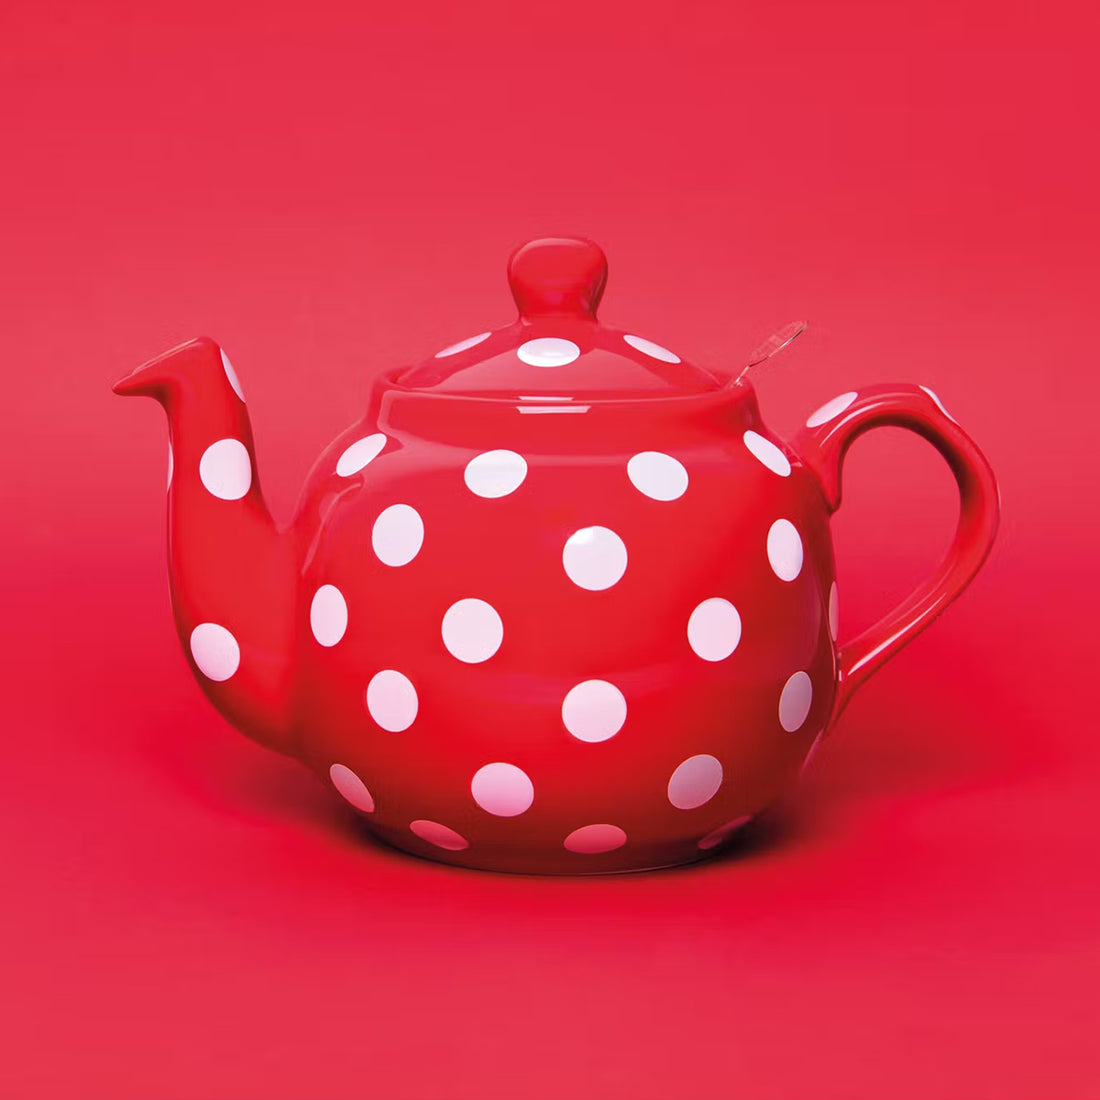 London Pottery Farmhouse 4 Cup Teapot - Red with White Spots